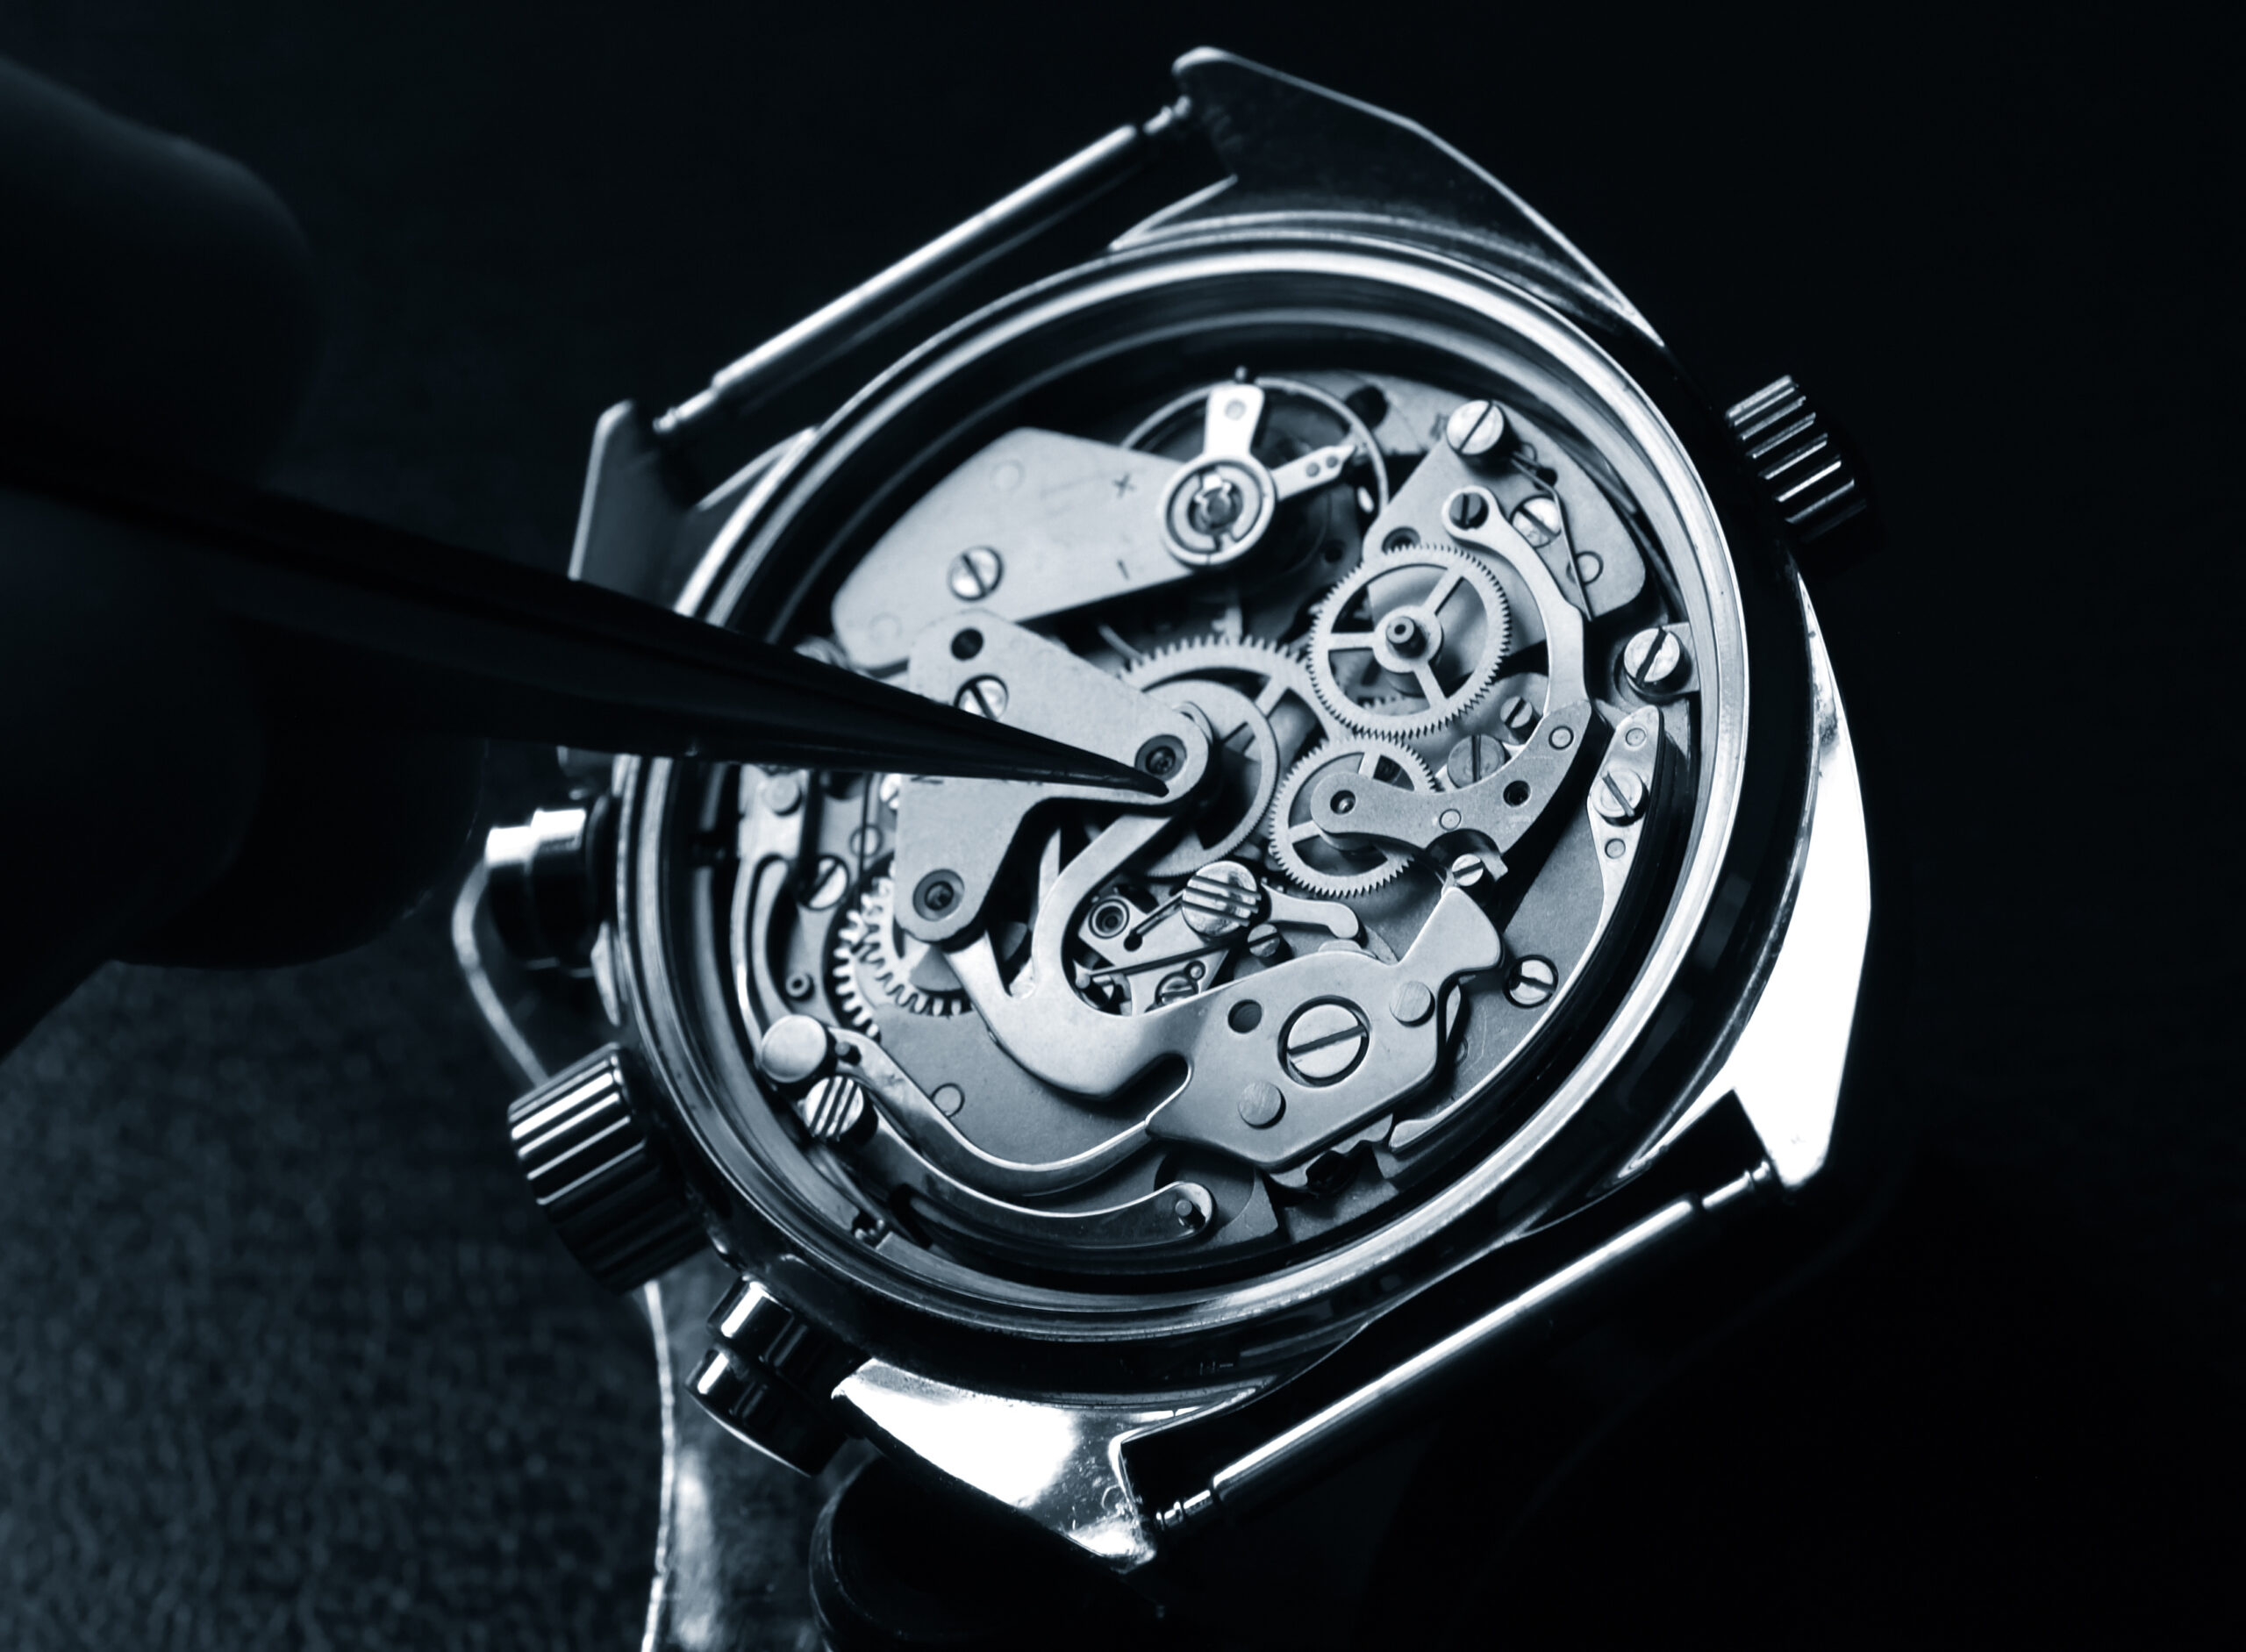 Servicing and Repairing Mechanical Chronograph Watches - YouTube